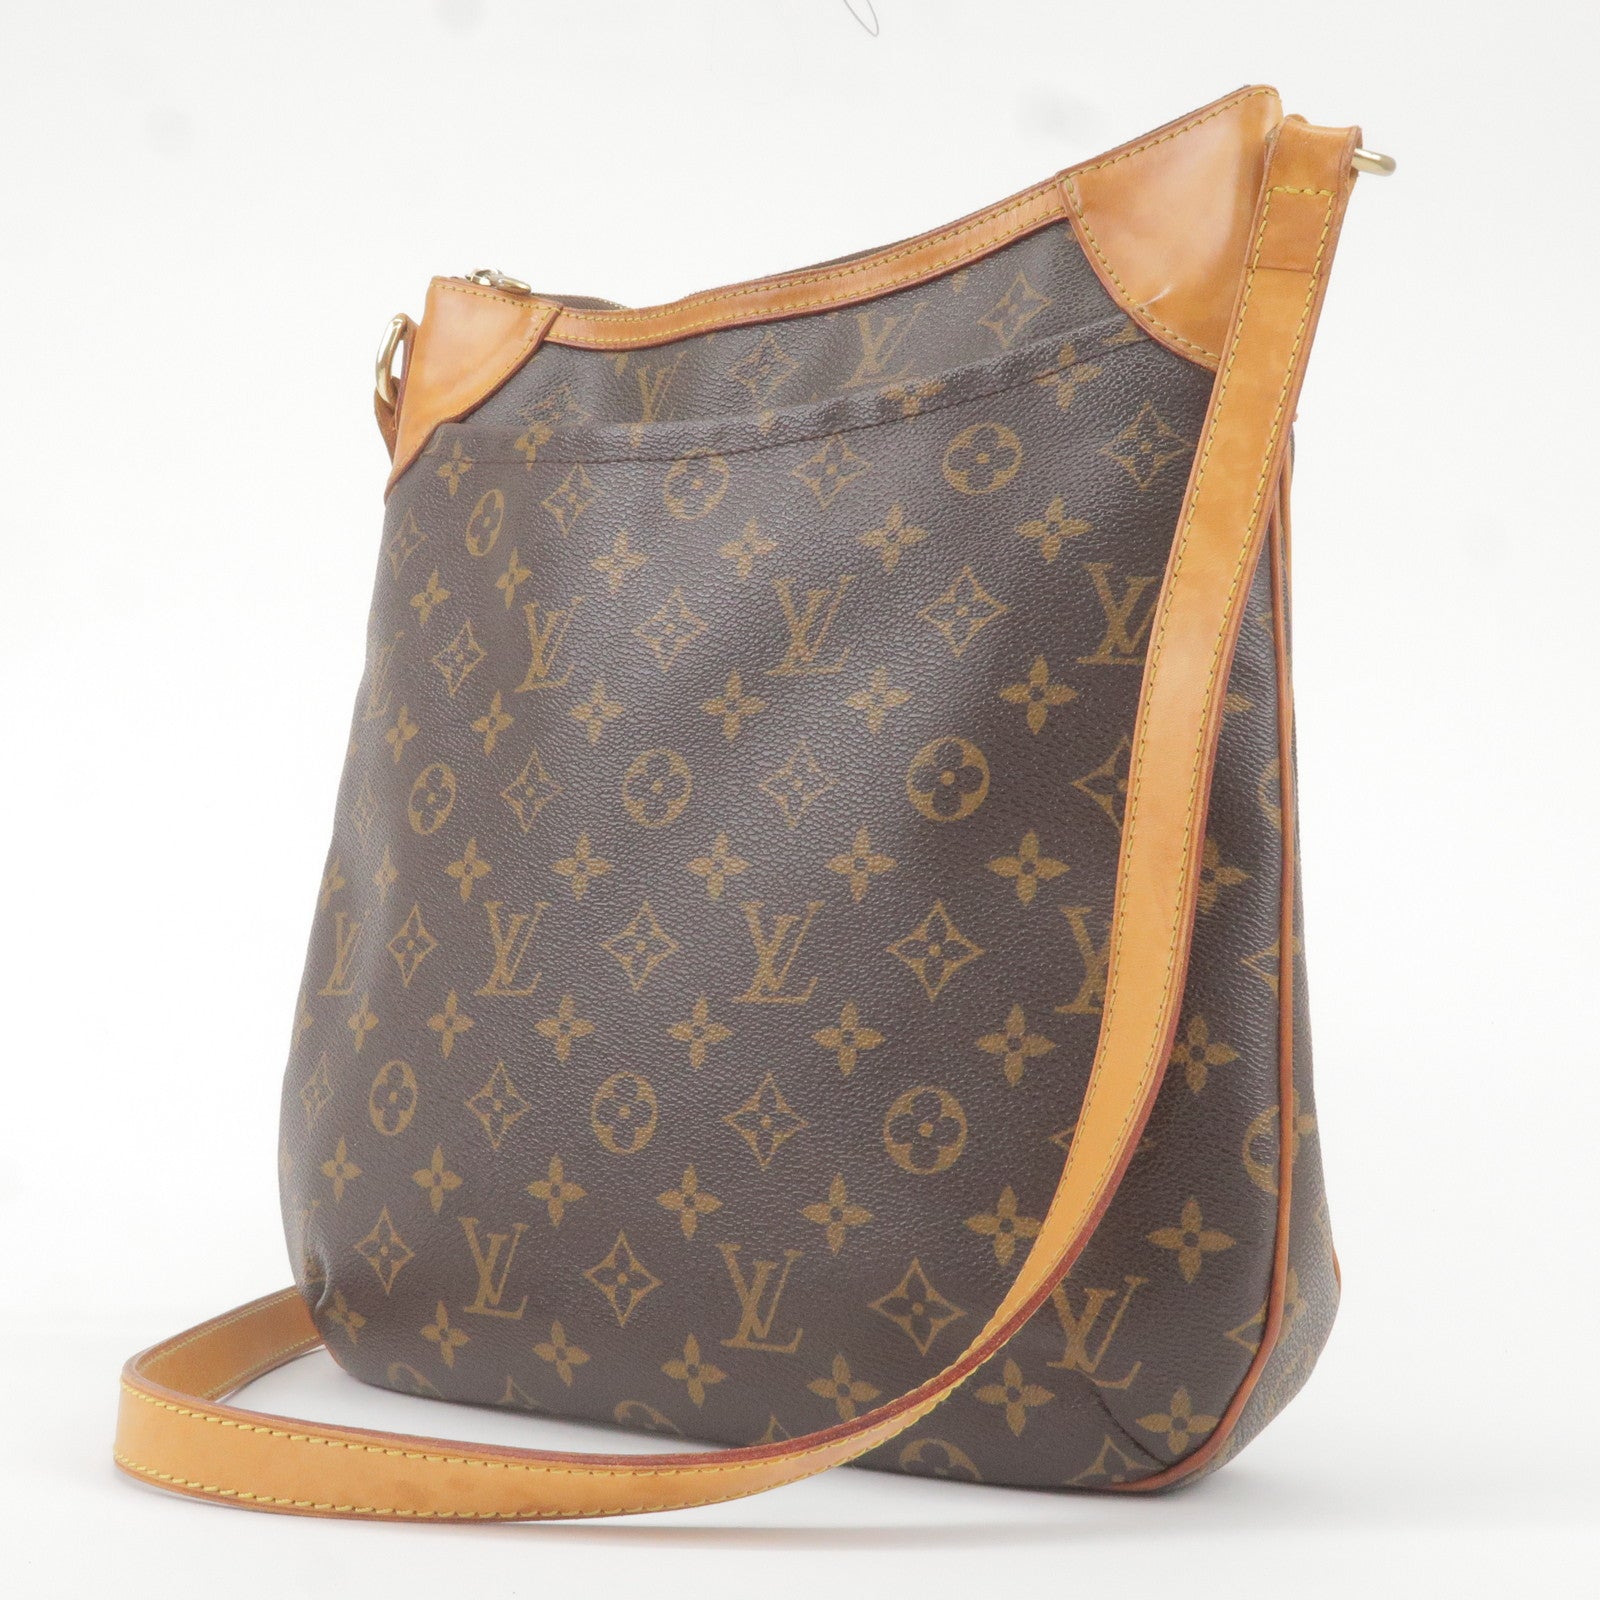 Louis Vuitton Pre-owned on My Side Bag